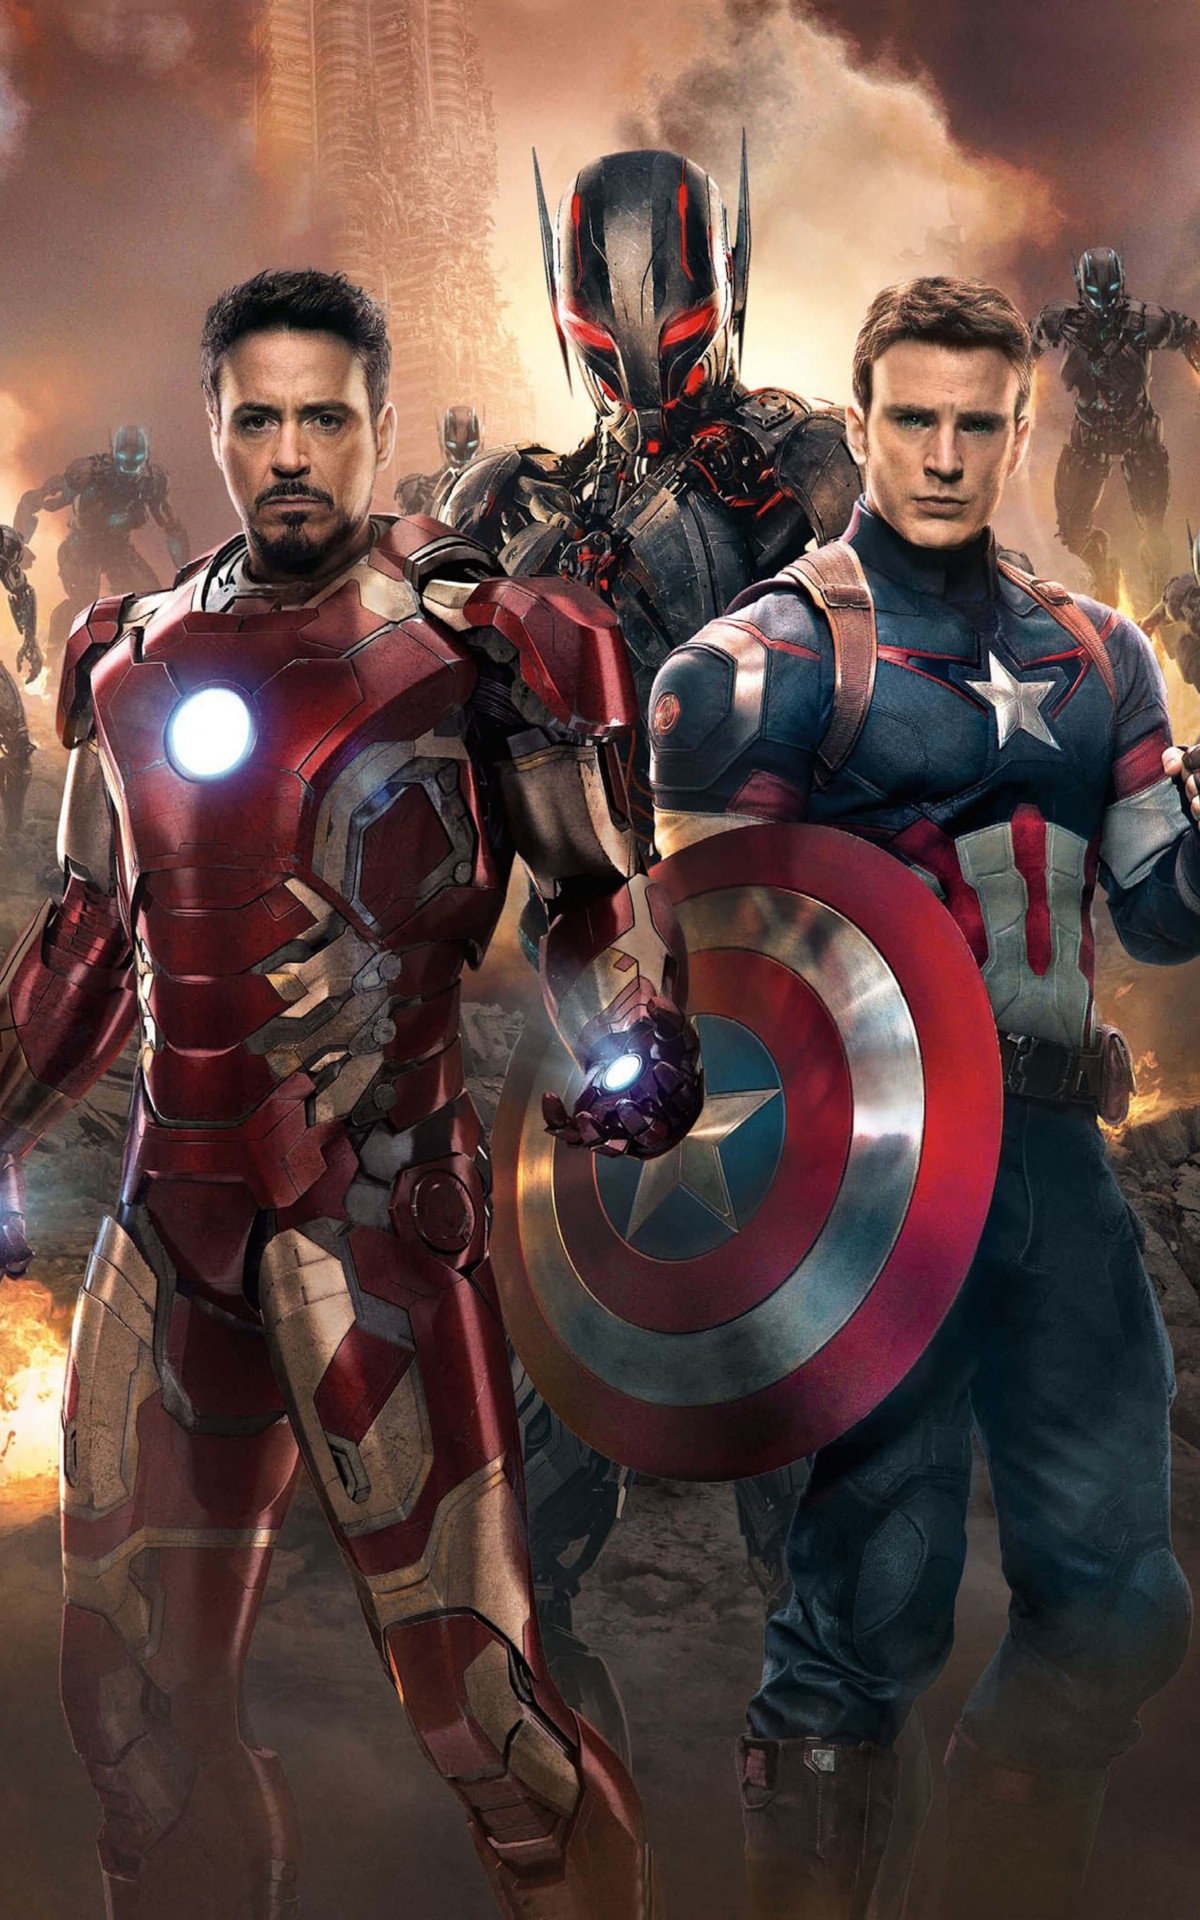 The Avengers: Age of Ultron - Iron Man and Captain America Wallpaper for Amazon Kindle Fire HDX